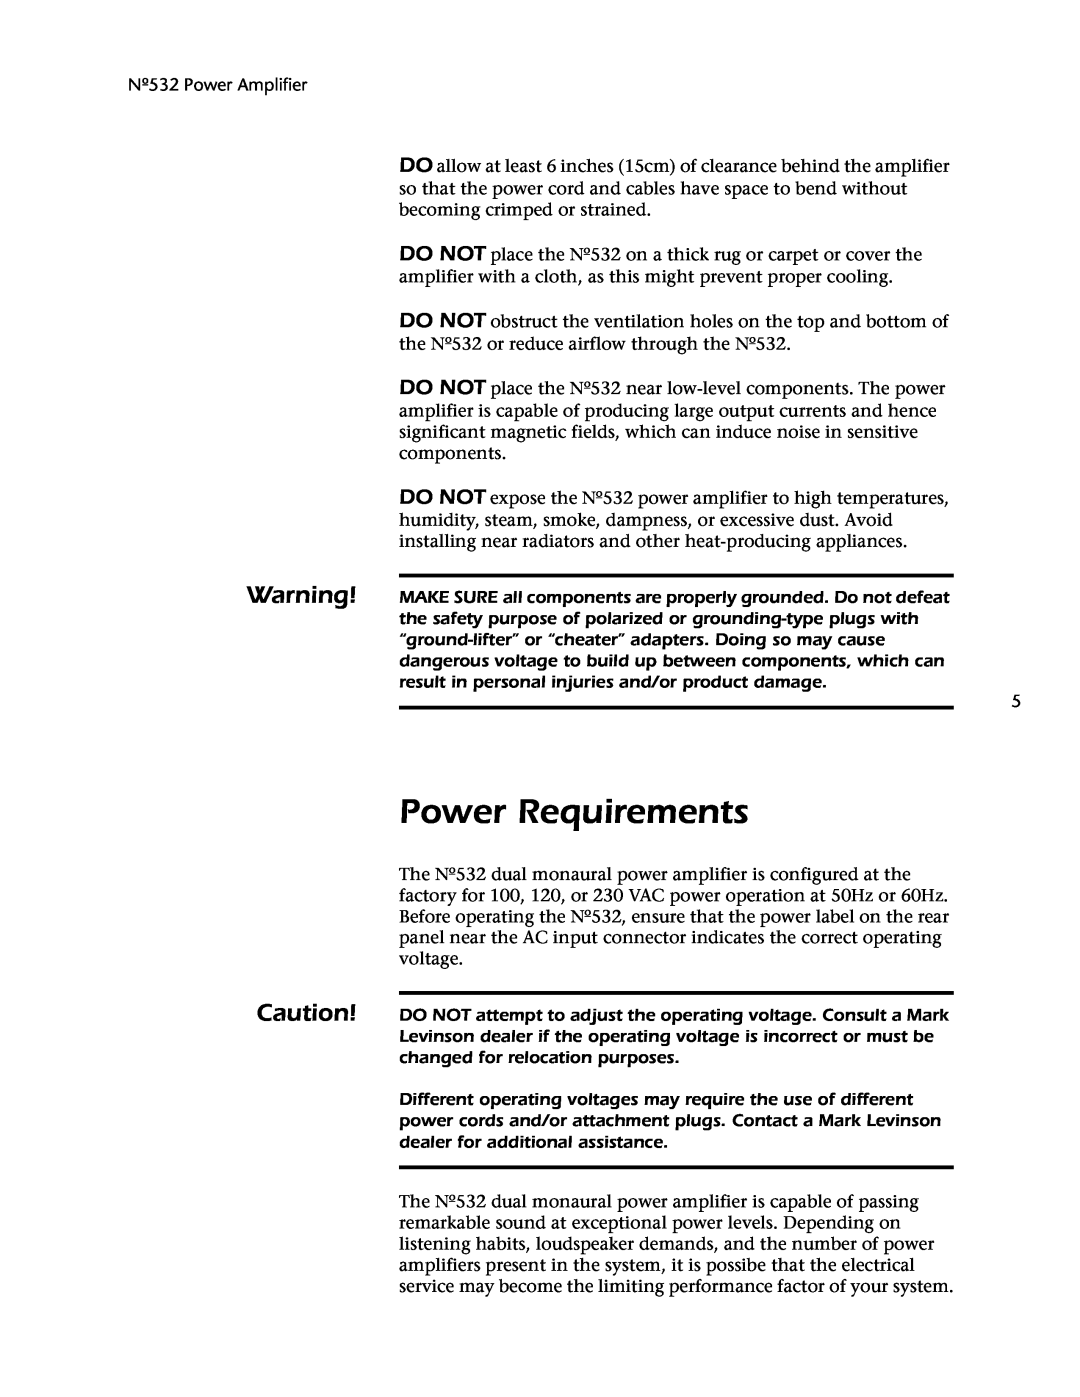 Mark Levinson 532 owner manual Power Requirements 